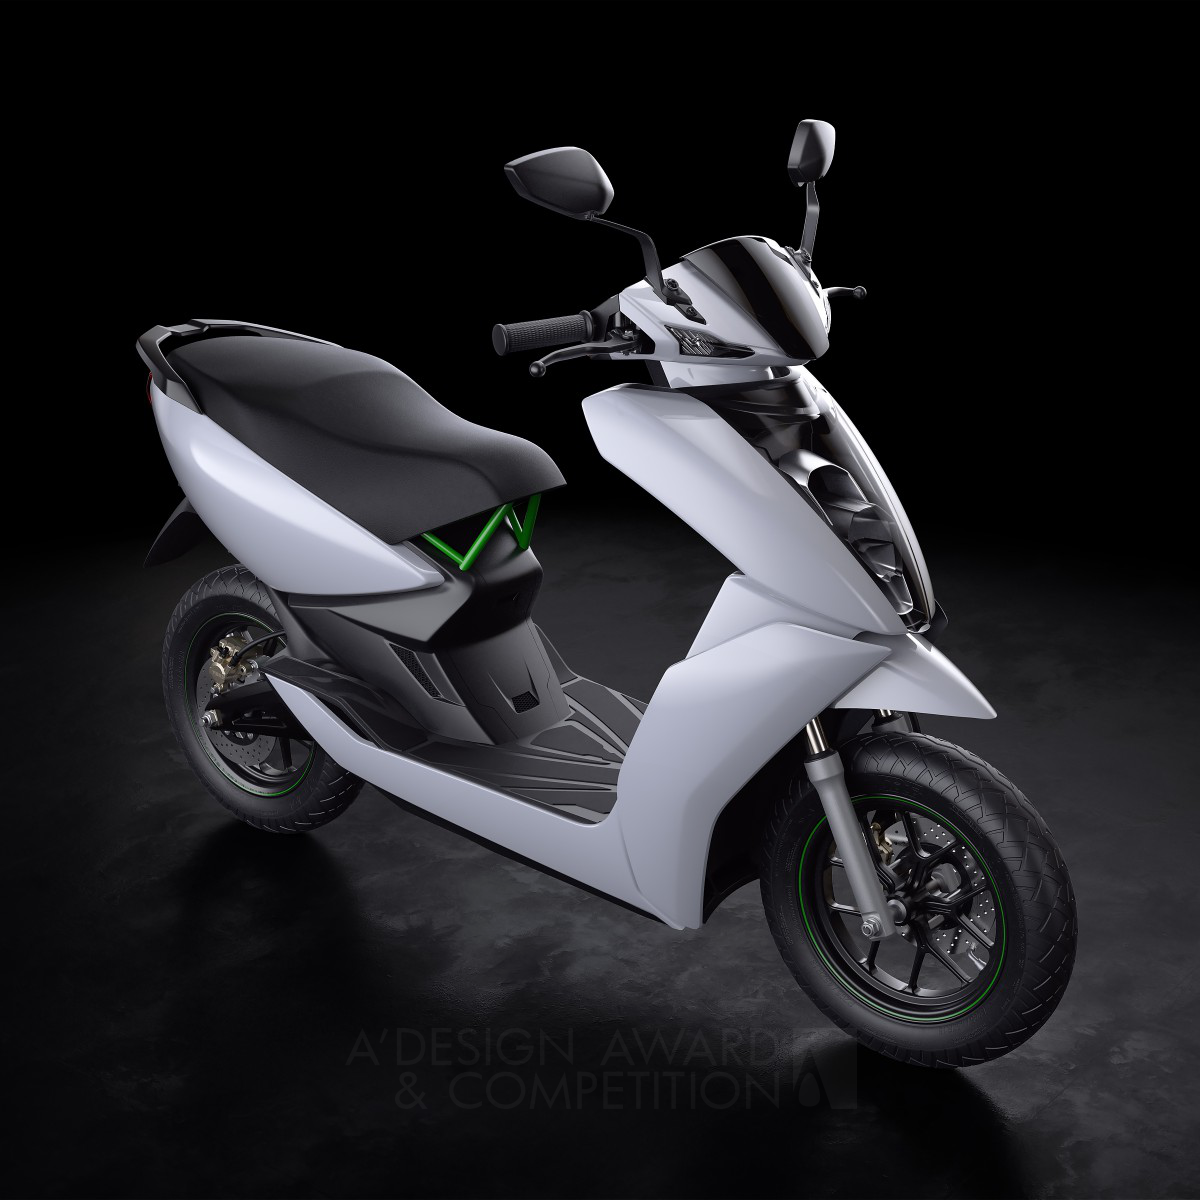 Ather S340 <b>Smart Electric Scooter